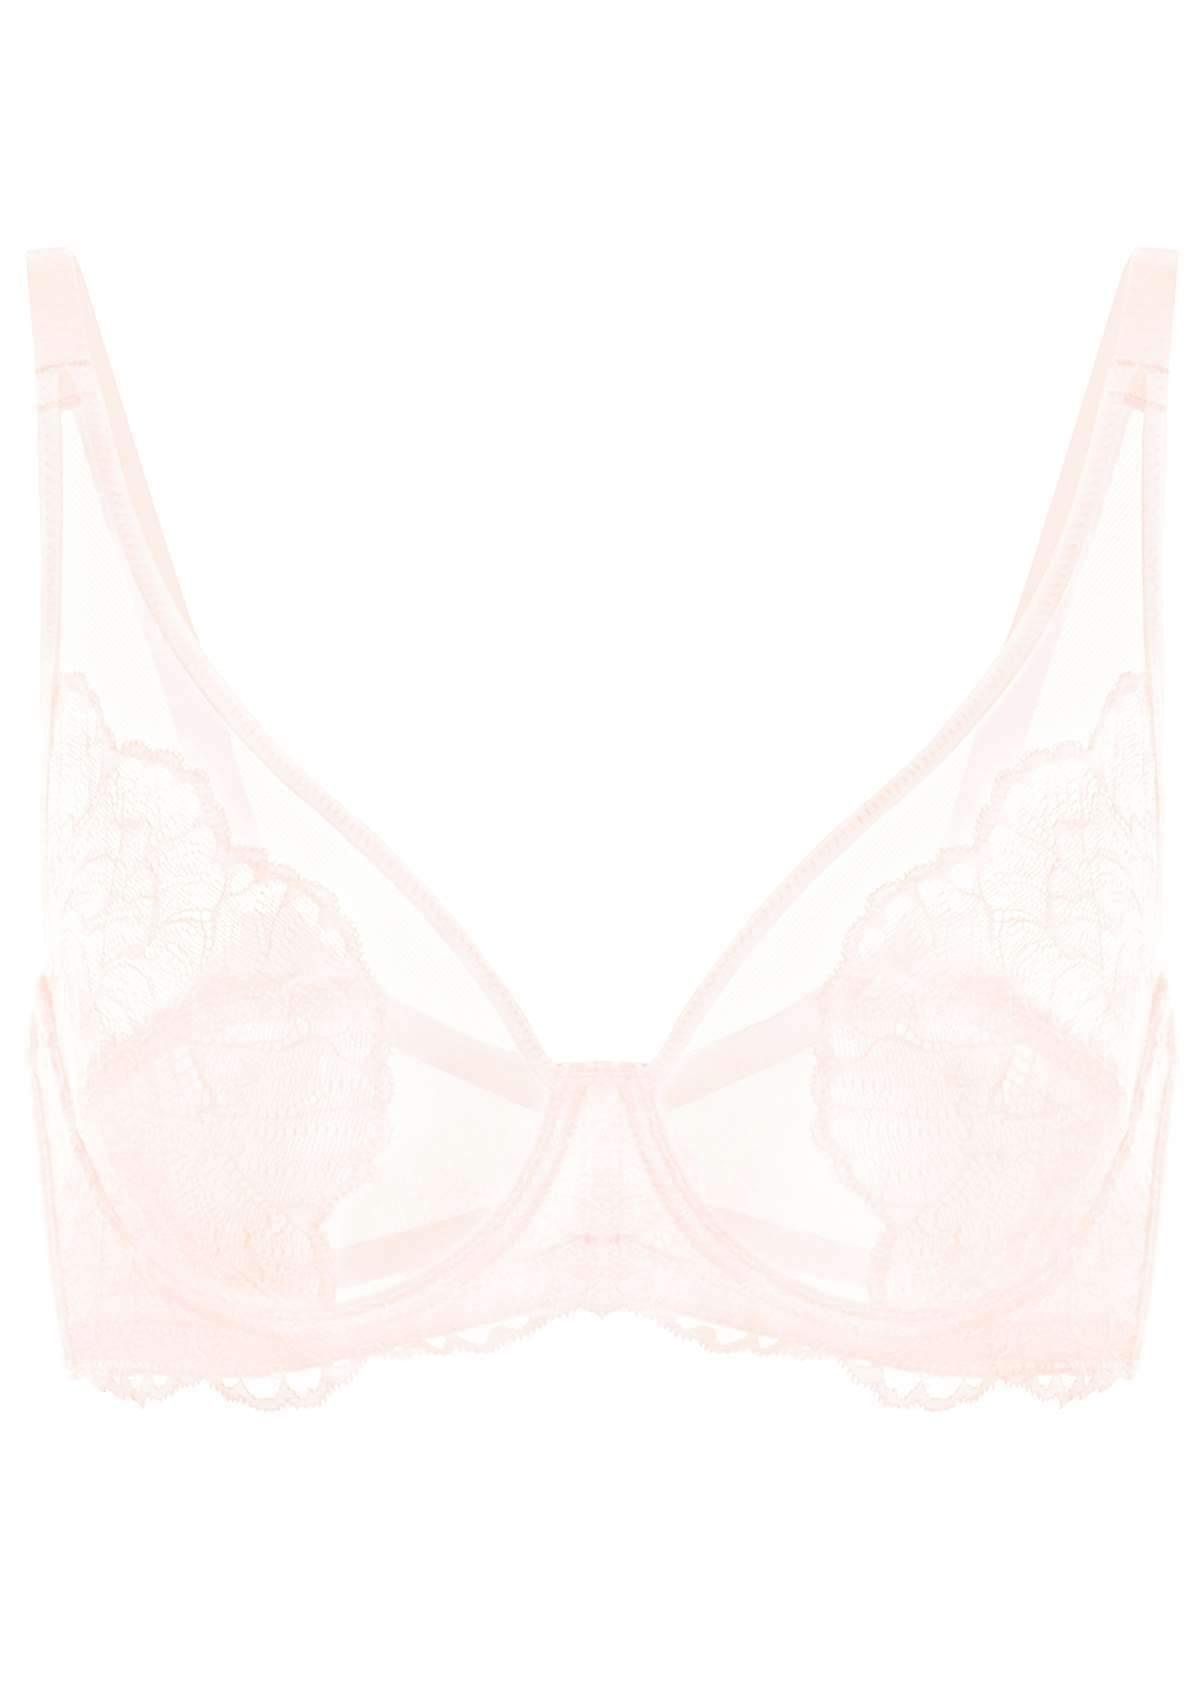 HSIA Blossom Sheer Lace Bra: Comfortable Underwire Bra For Big Busts - White / 34 / DDD/F